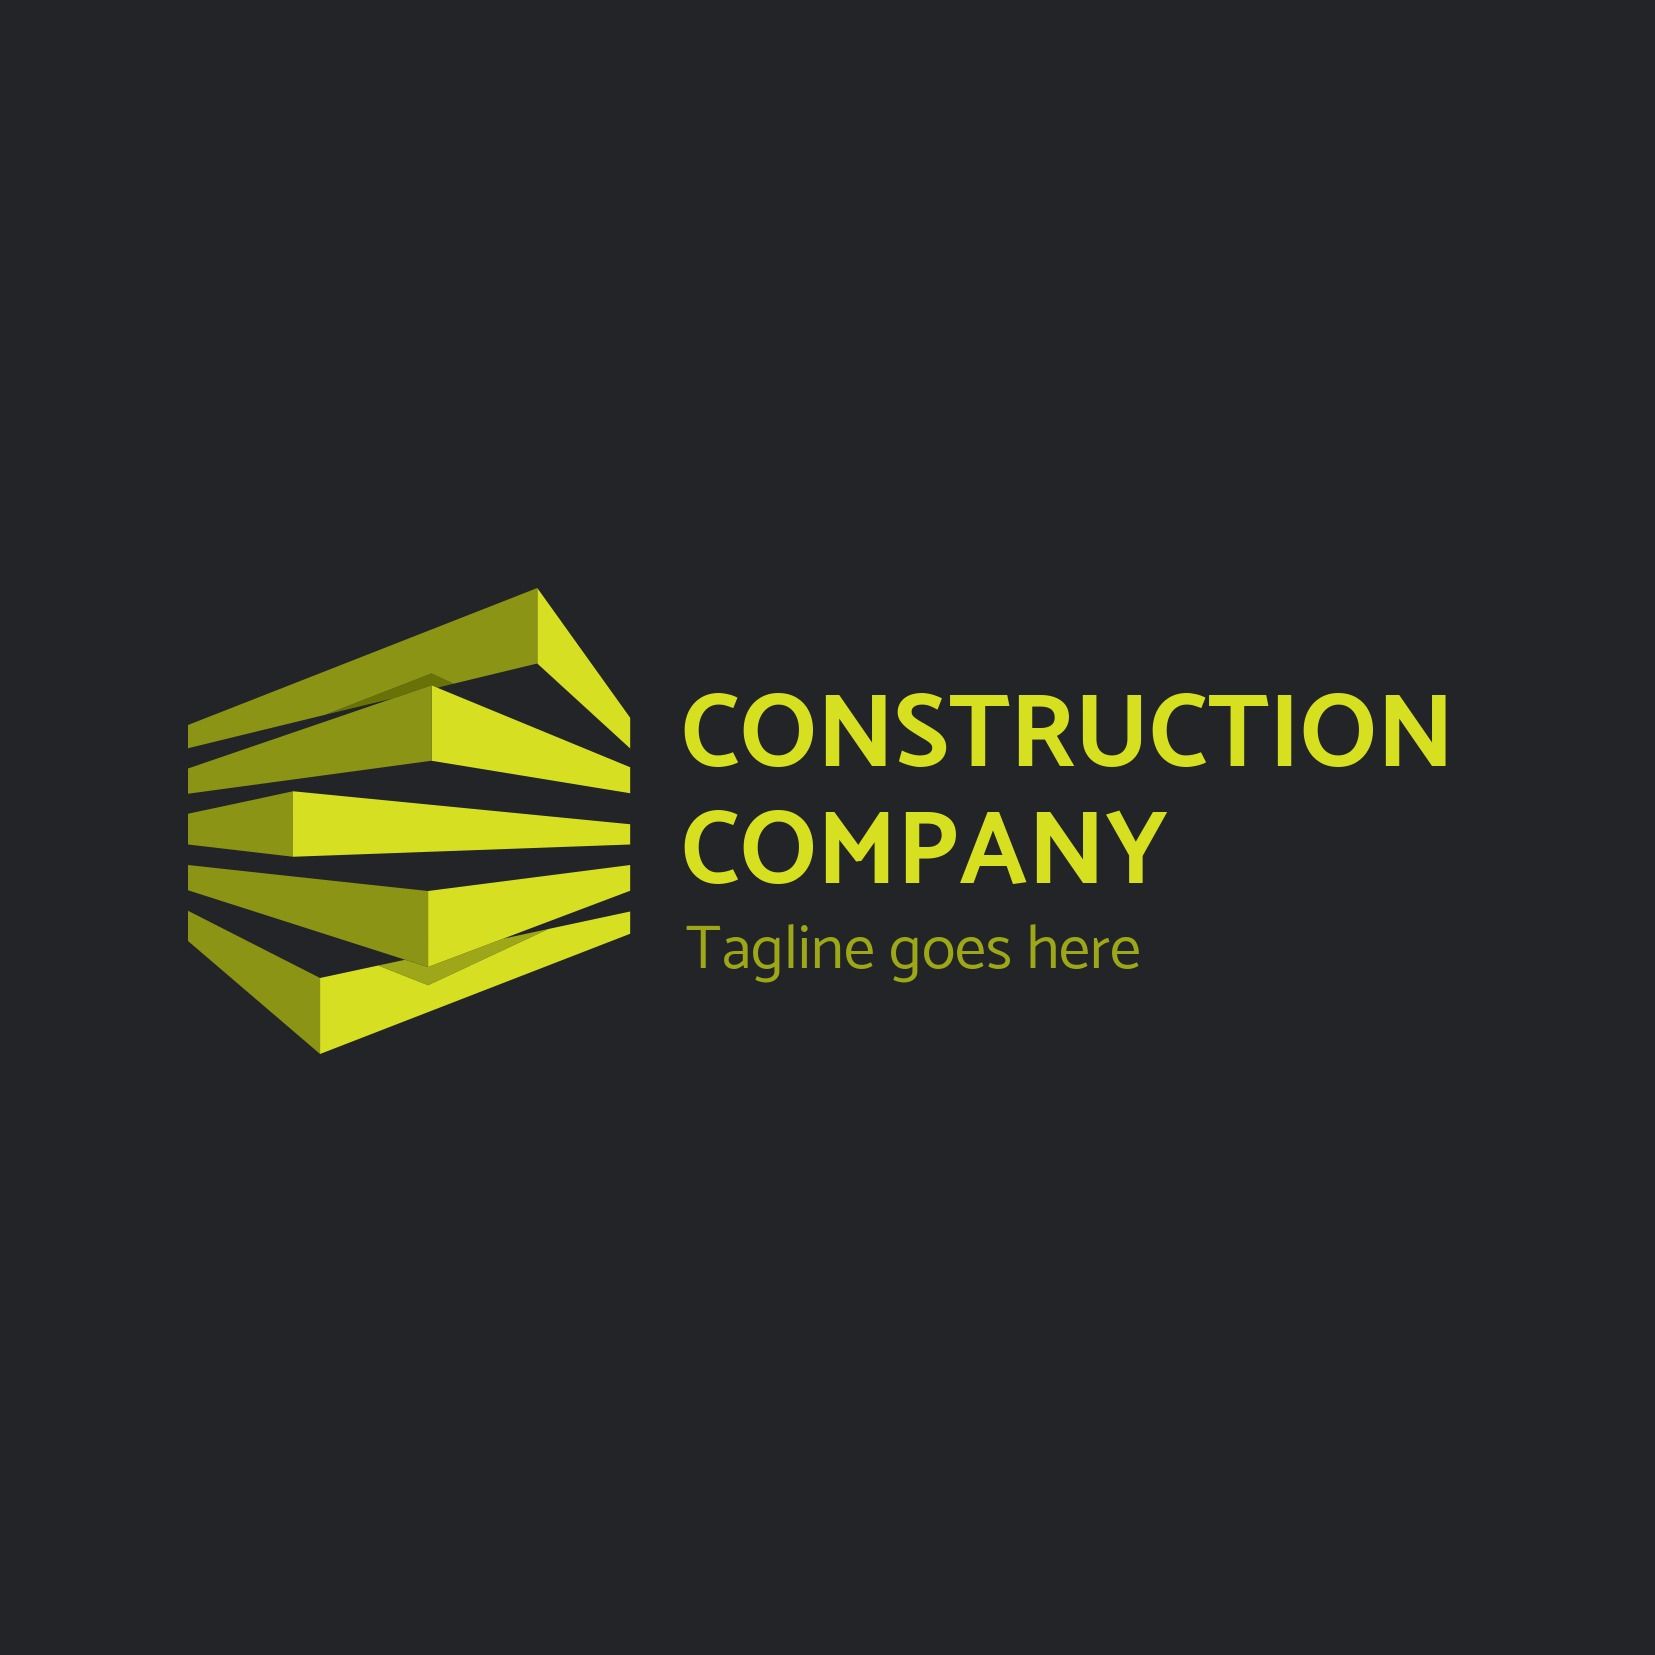 Cubic construction company logo with bright green text on dark background - The versatility of the Catamaran font - Image